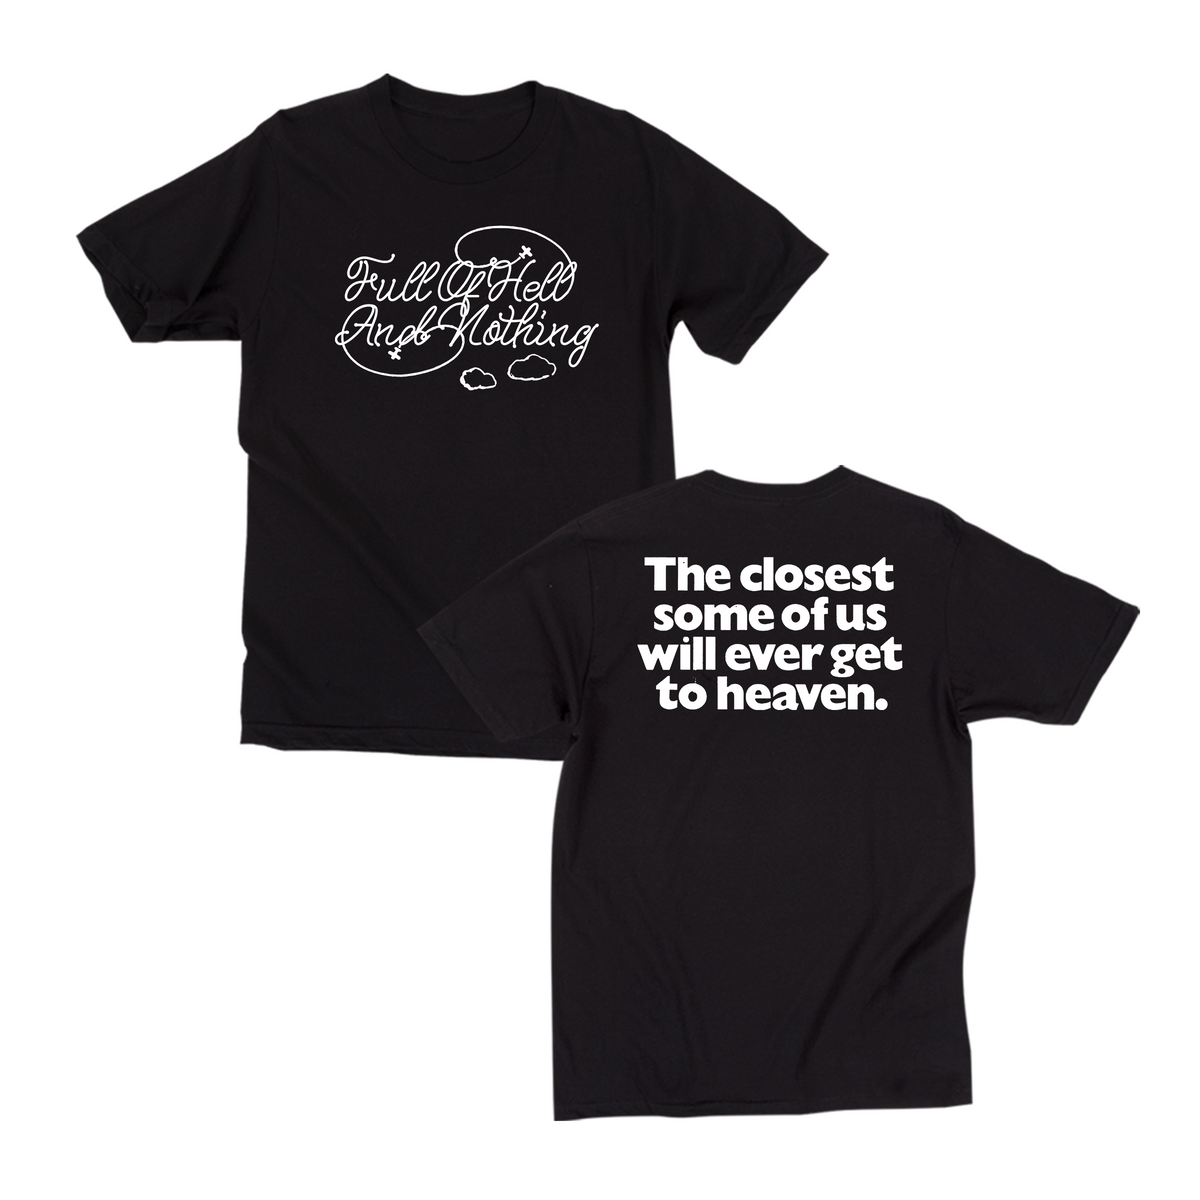 Full of Hell and Nothing Heaven T-Shirt Black